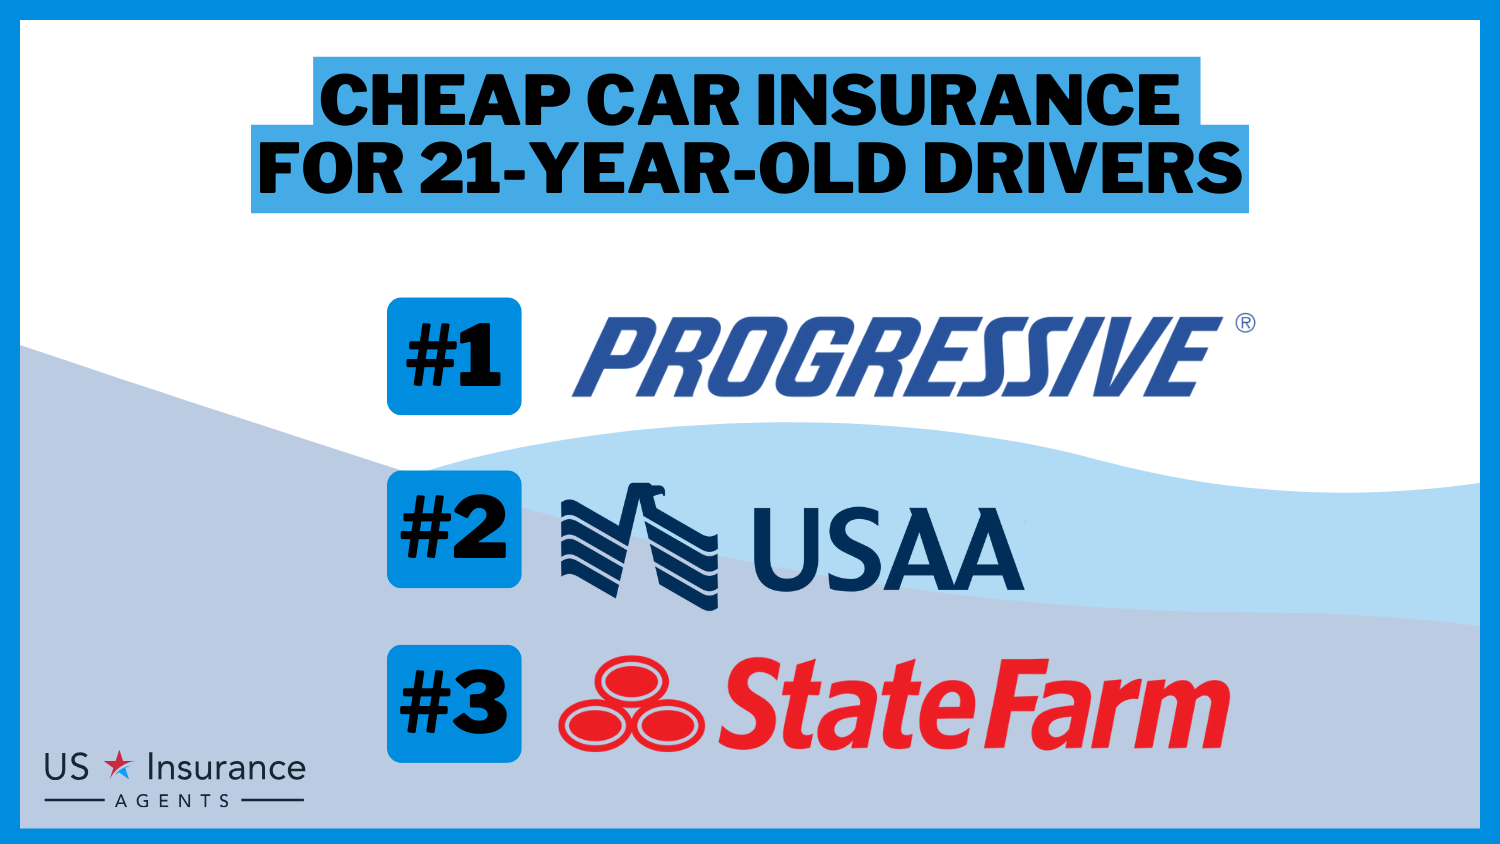 Cheap Car Insurance Companies for 21-Year-Old Drivers: Progressive, USAA, and State Farm.